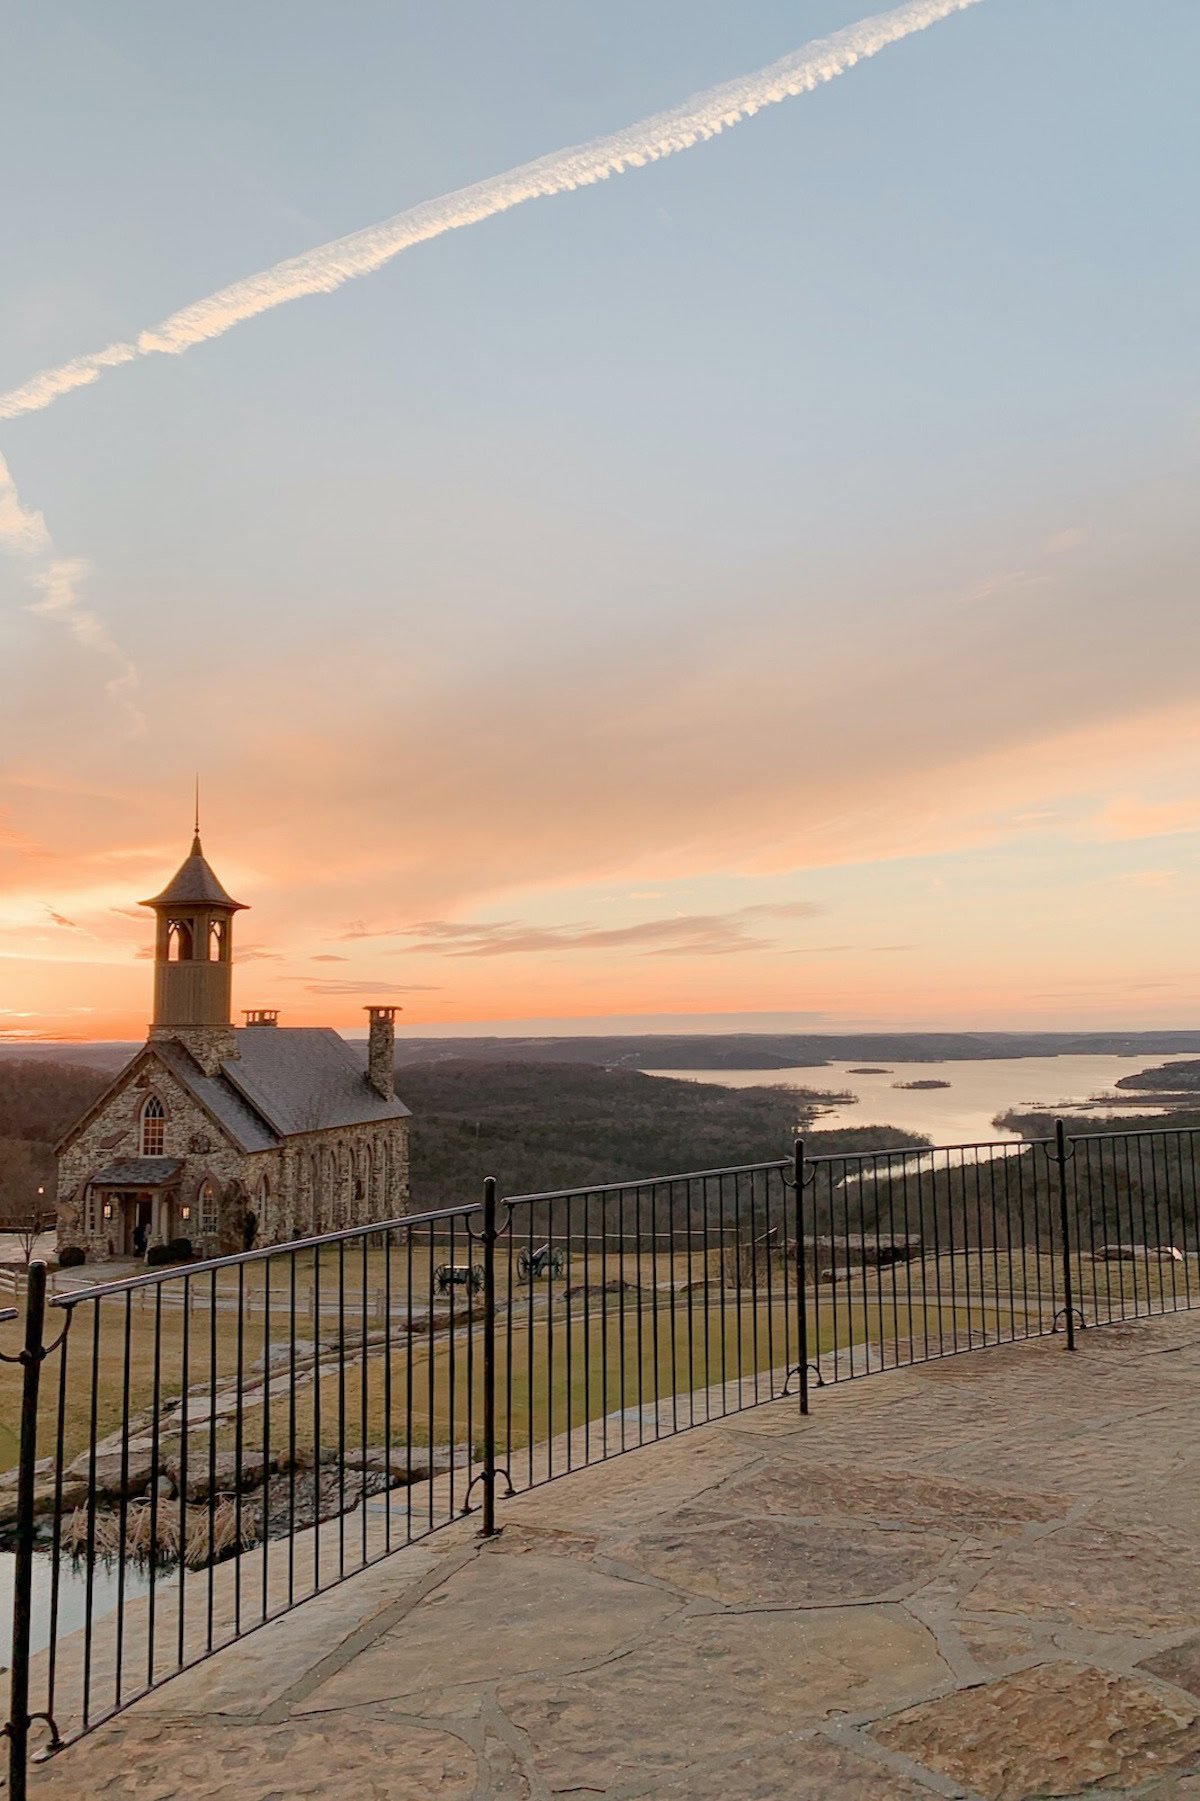 A stone church with a steeple at sunset overlooks a vast landscape of hills and a lake, bordered by a black iron fence in the foreground. It's one of the serene spots to visit among many things to do in Branson.